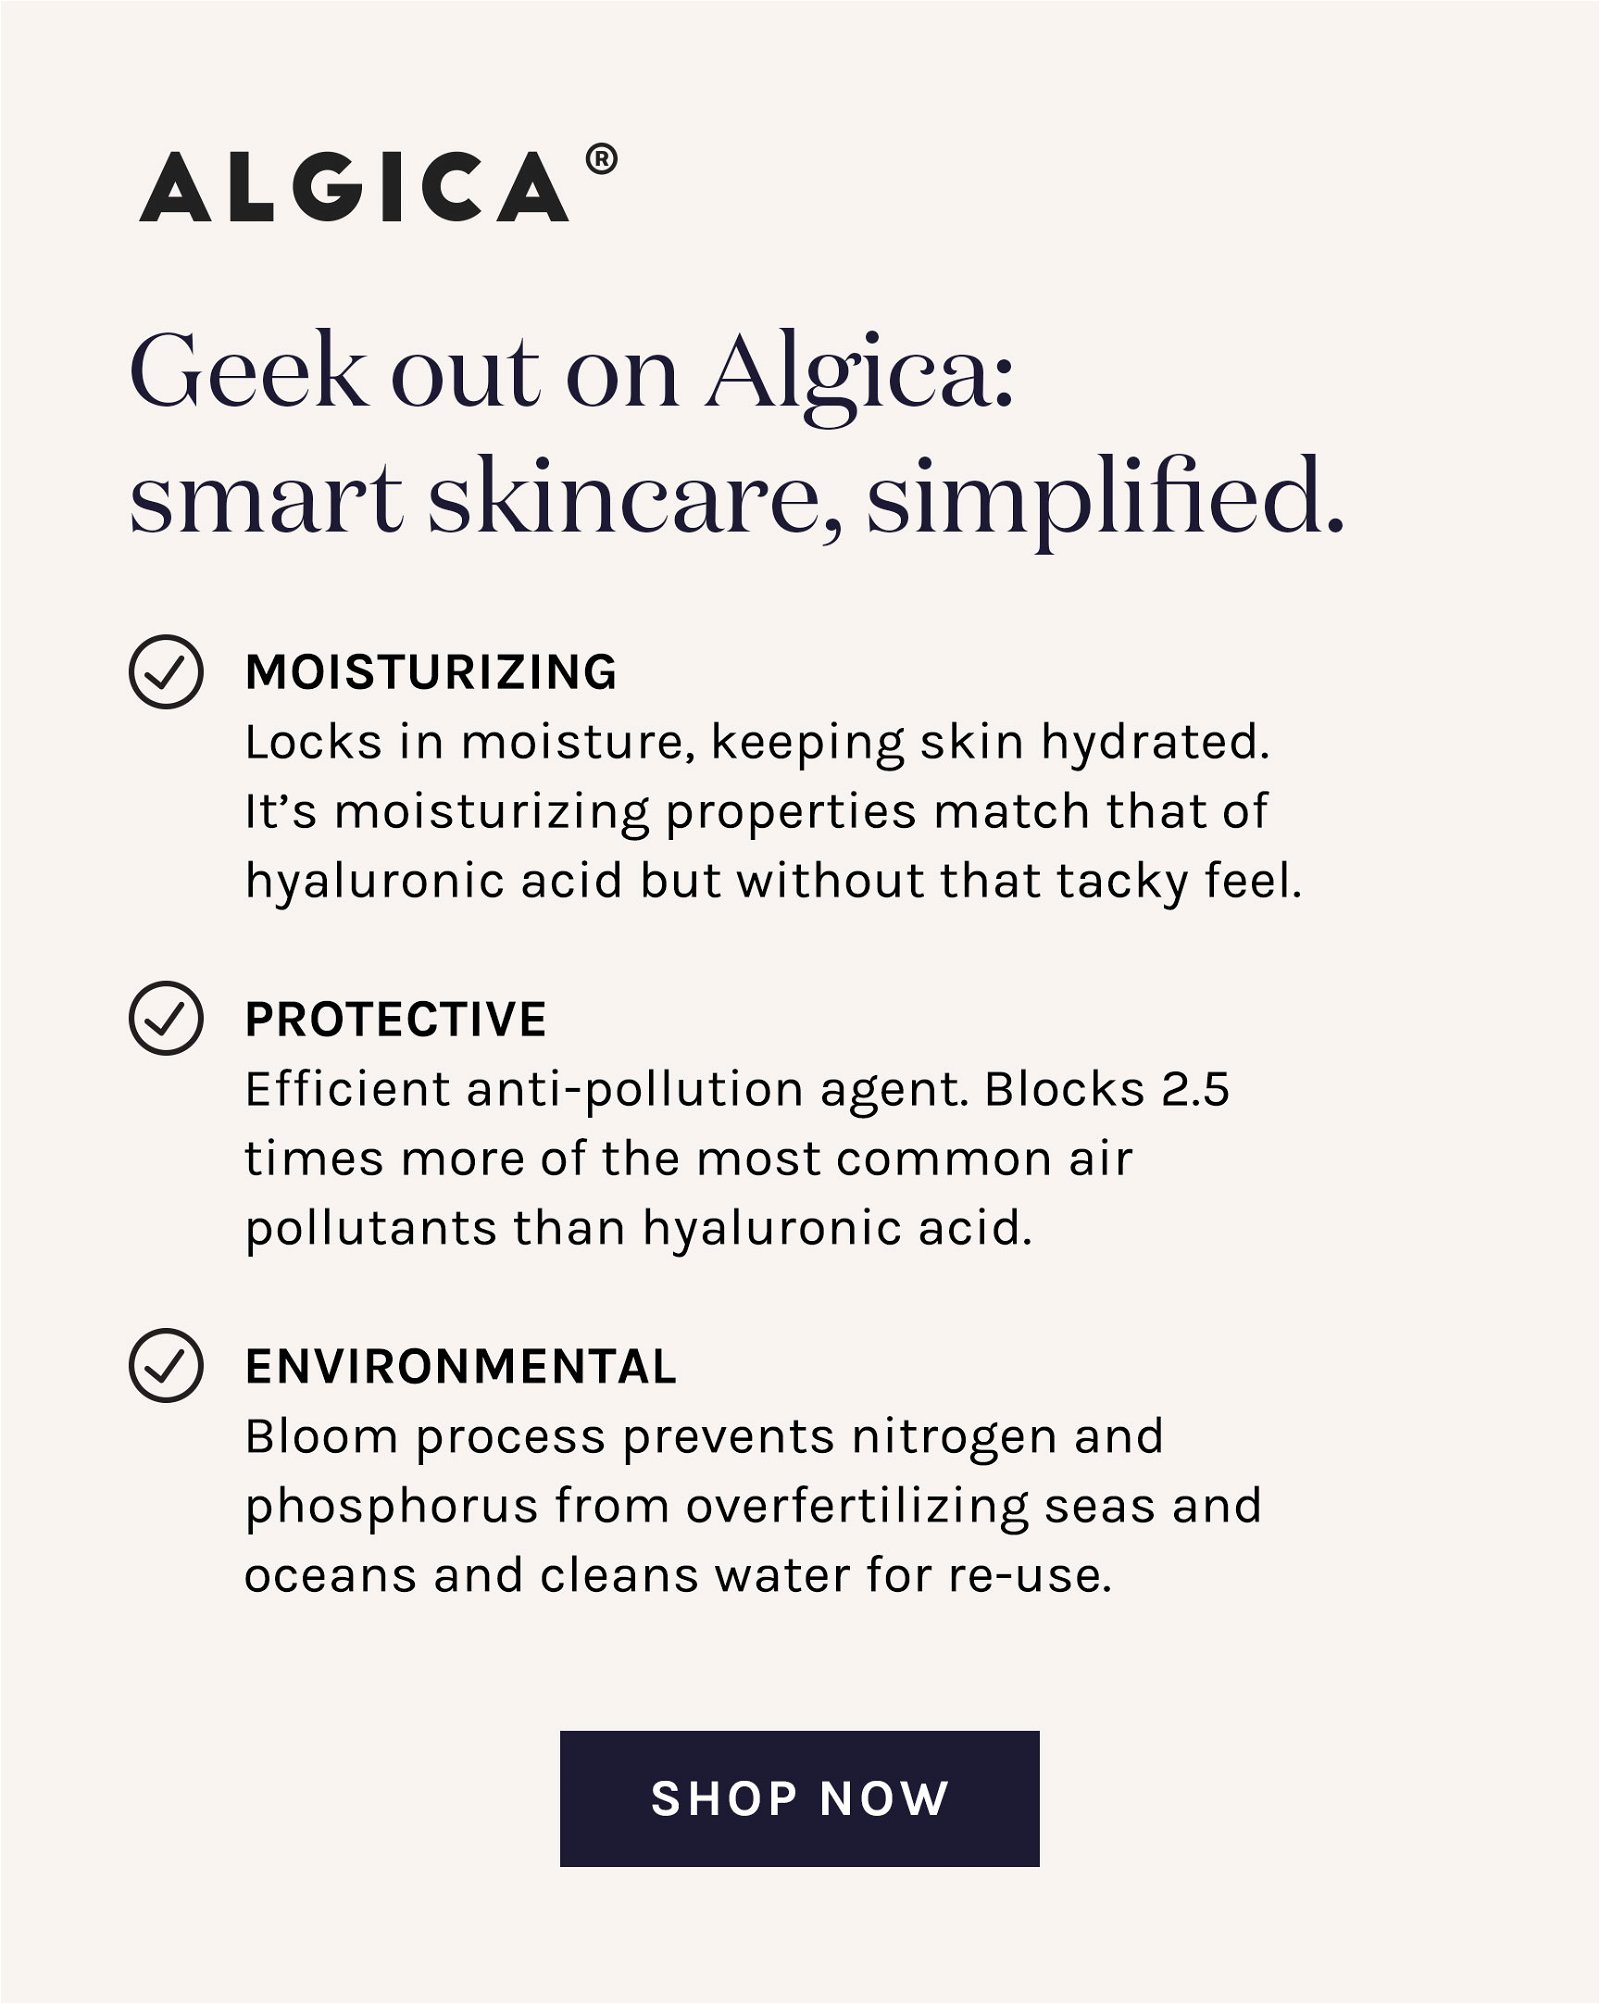 algica- geek out on smart skincare, simplified. 